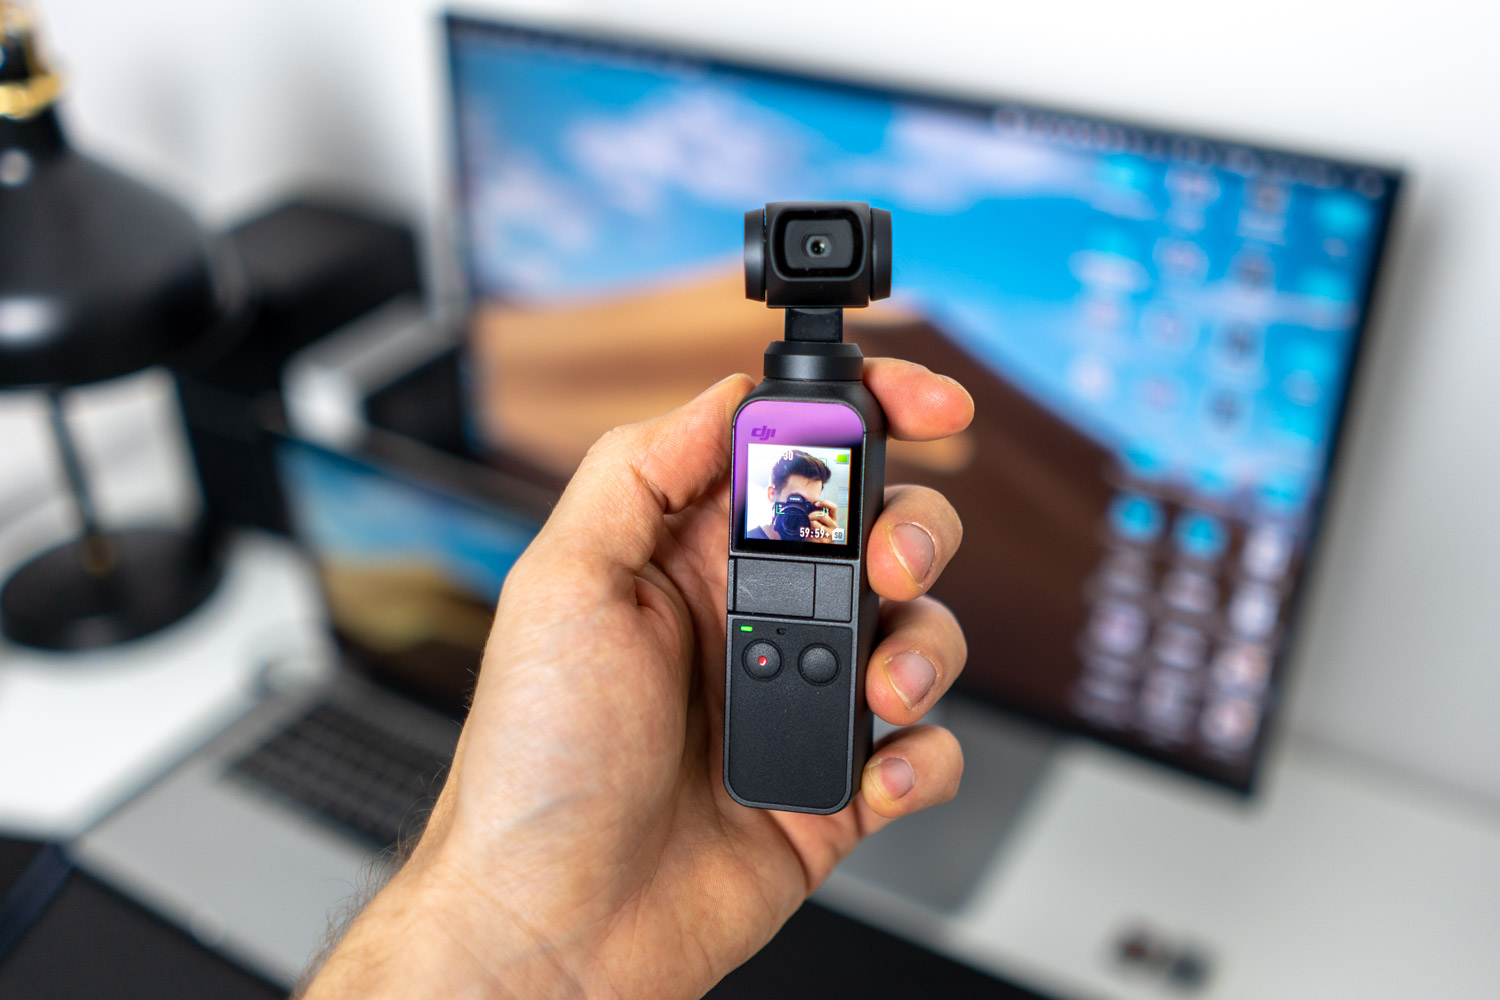 DJI Osmo Pocket, or 4K camera with gimbal, which you can put in your